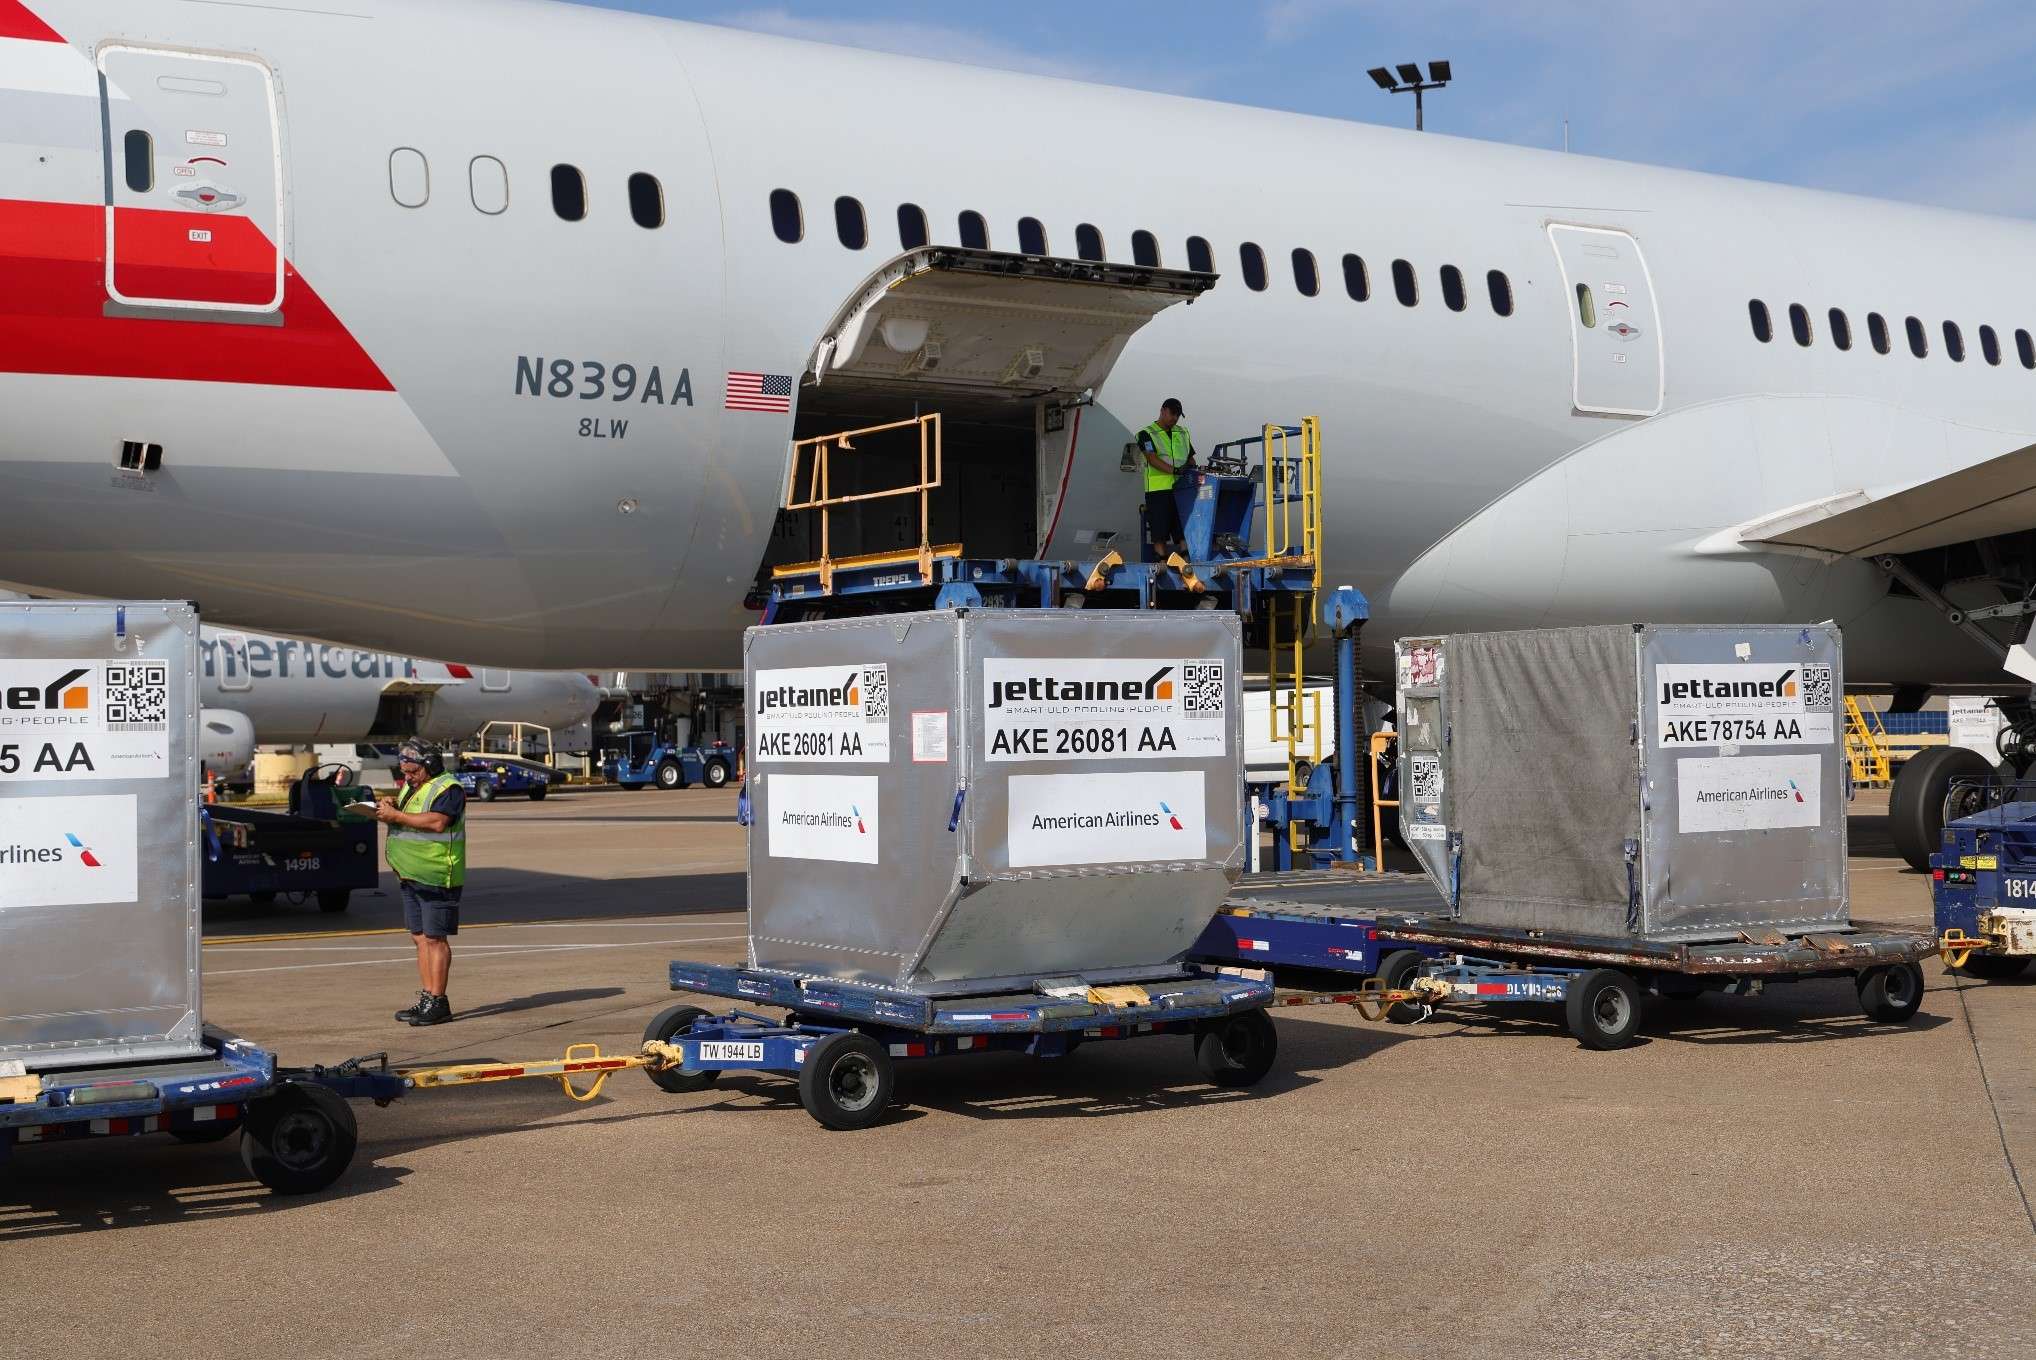 An American Airlines jet is loaded with supplies to assist in Maui wildfires.